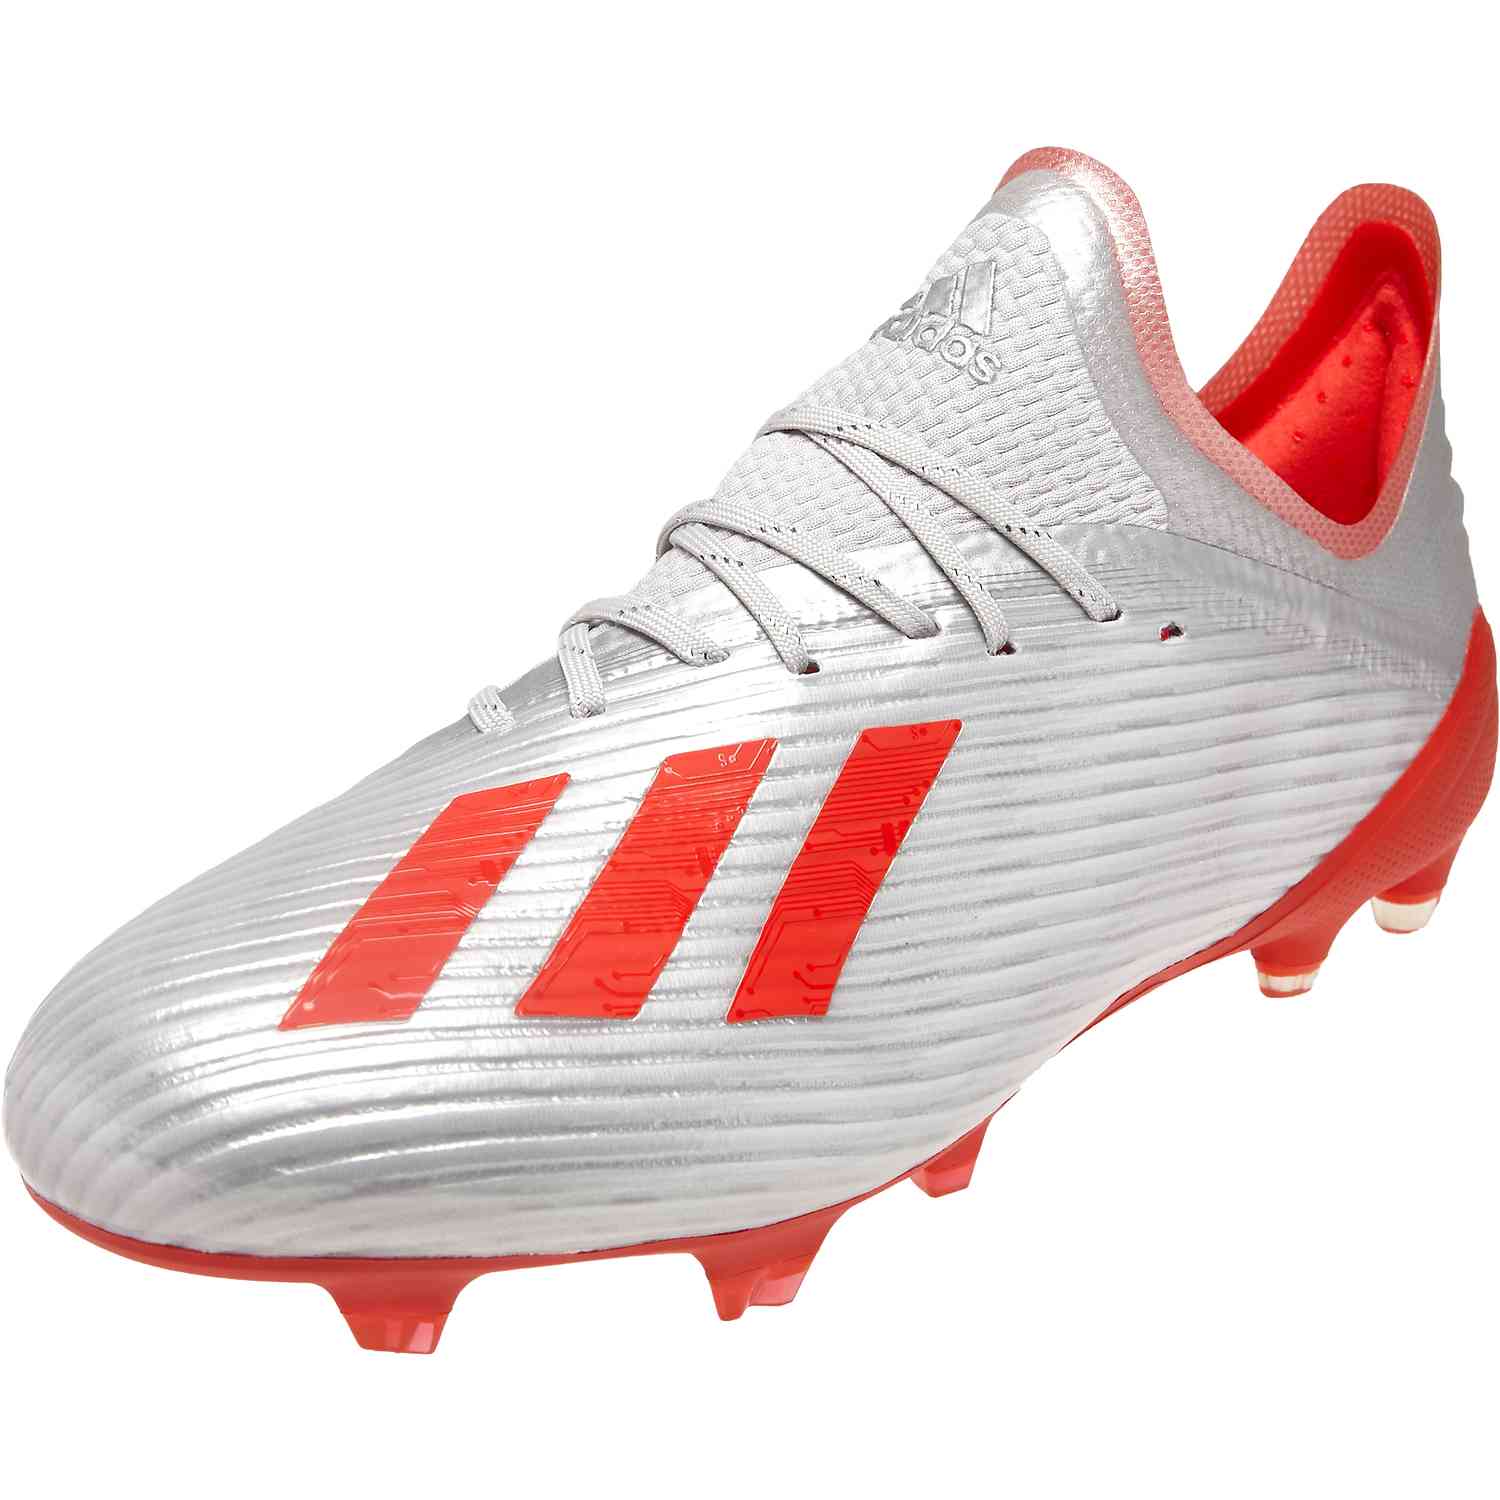 soccer shoes no cleats